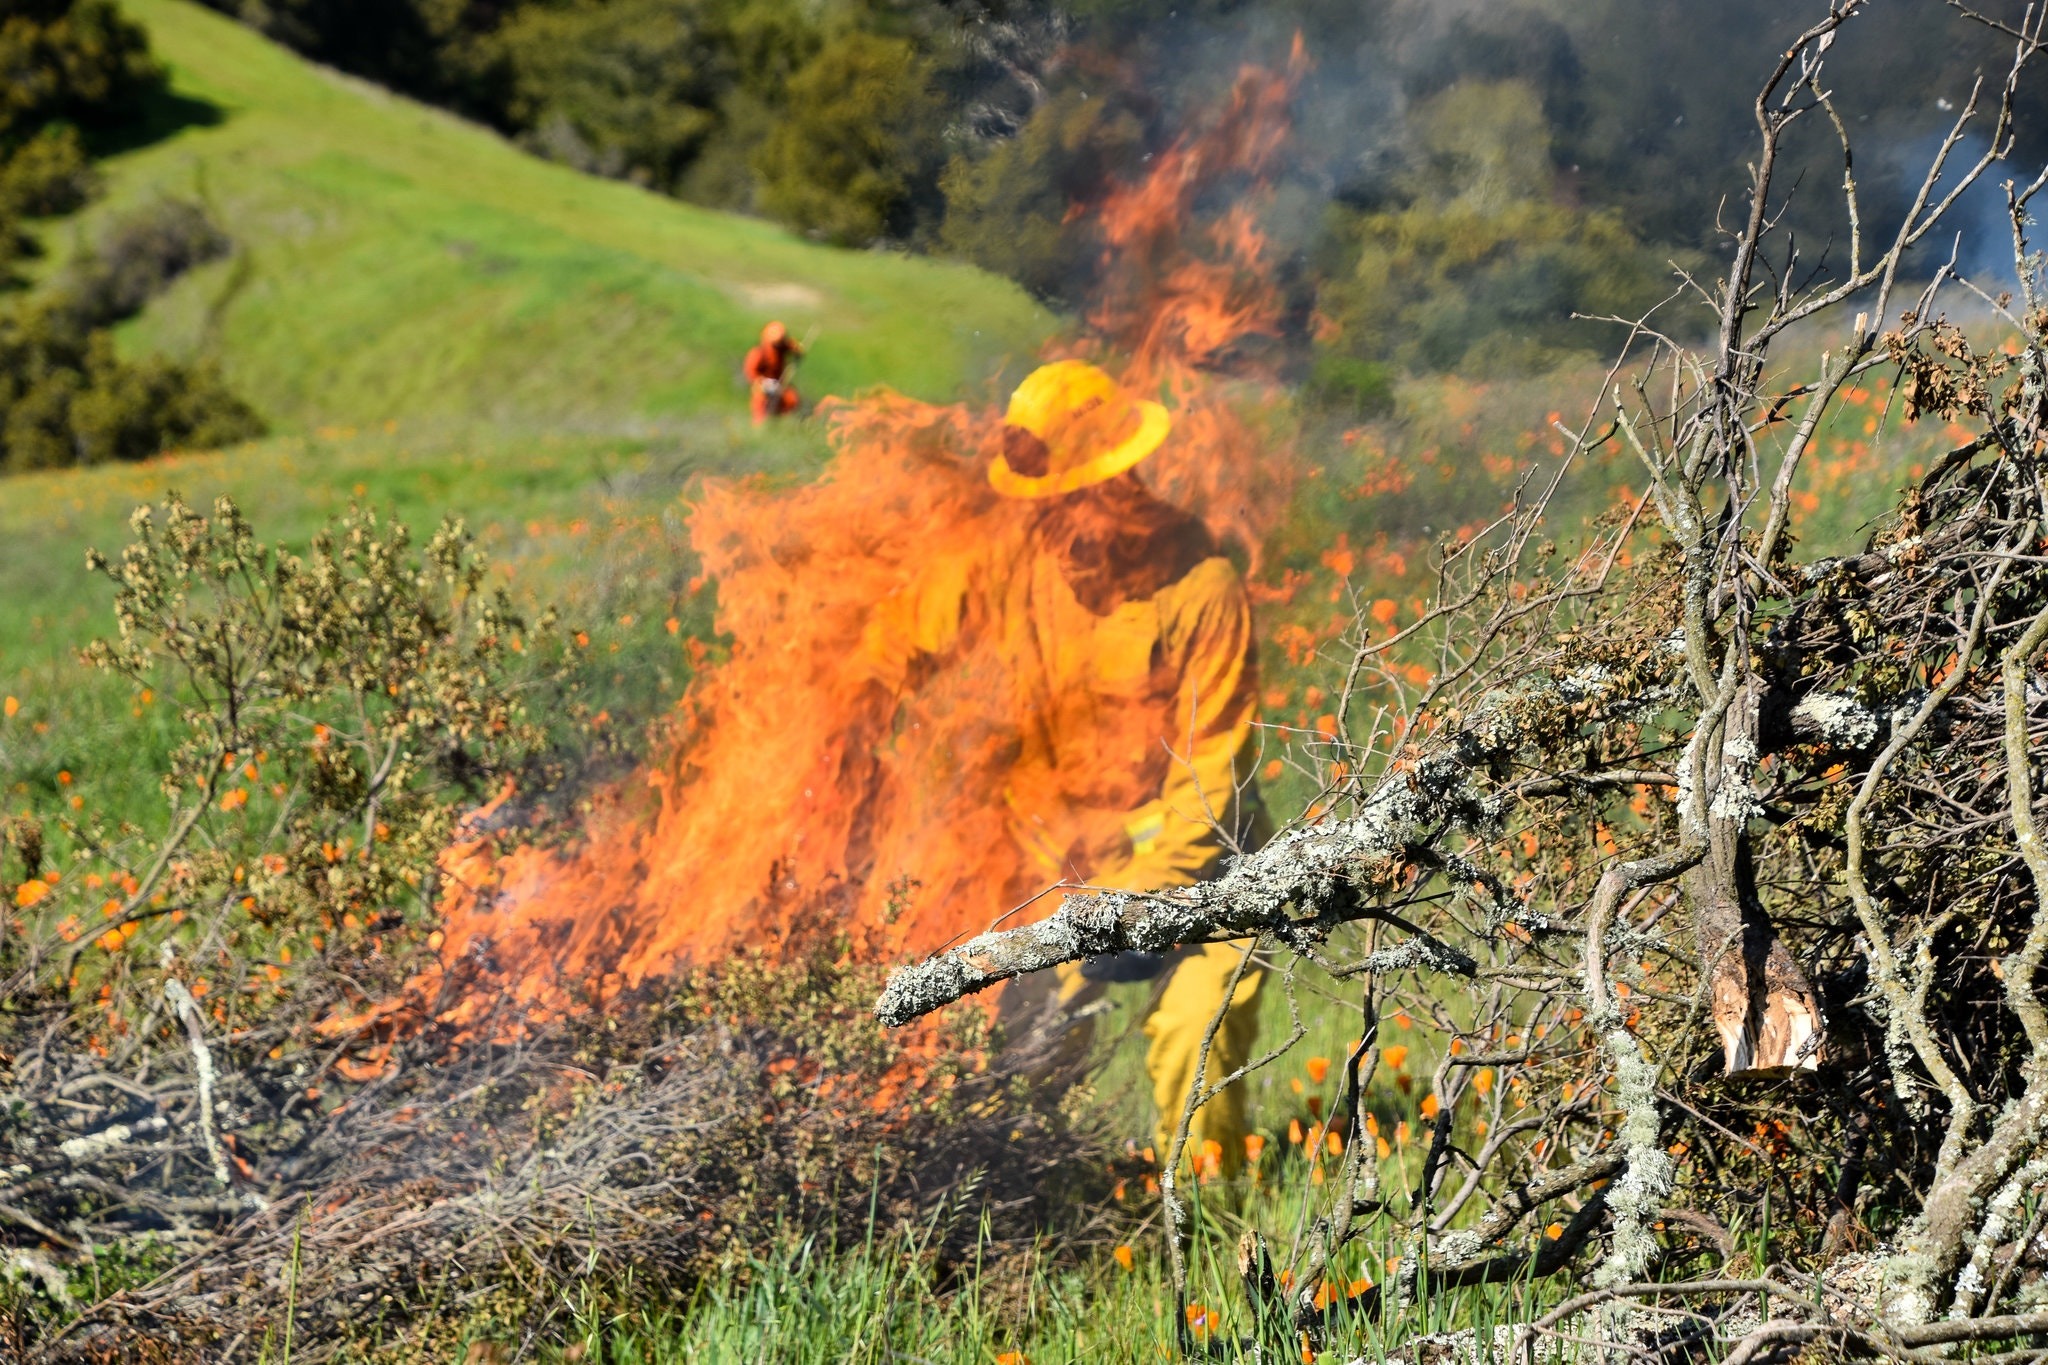 A firefighter in yellow protective gear is controlling a controlled burn in a grassy field. Bright flames are visible, and another firefighter in the background is overseeing the area. Amidst this fiery scene, a Berkeley Journalism team documents their brave efforts with grass and trees in the distance.